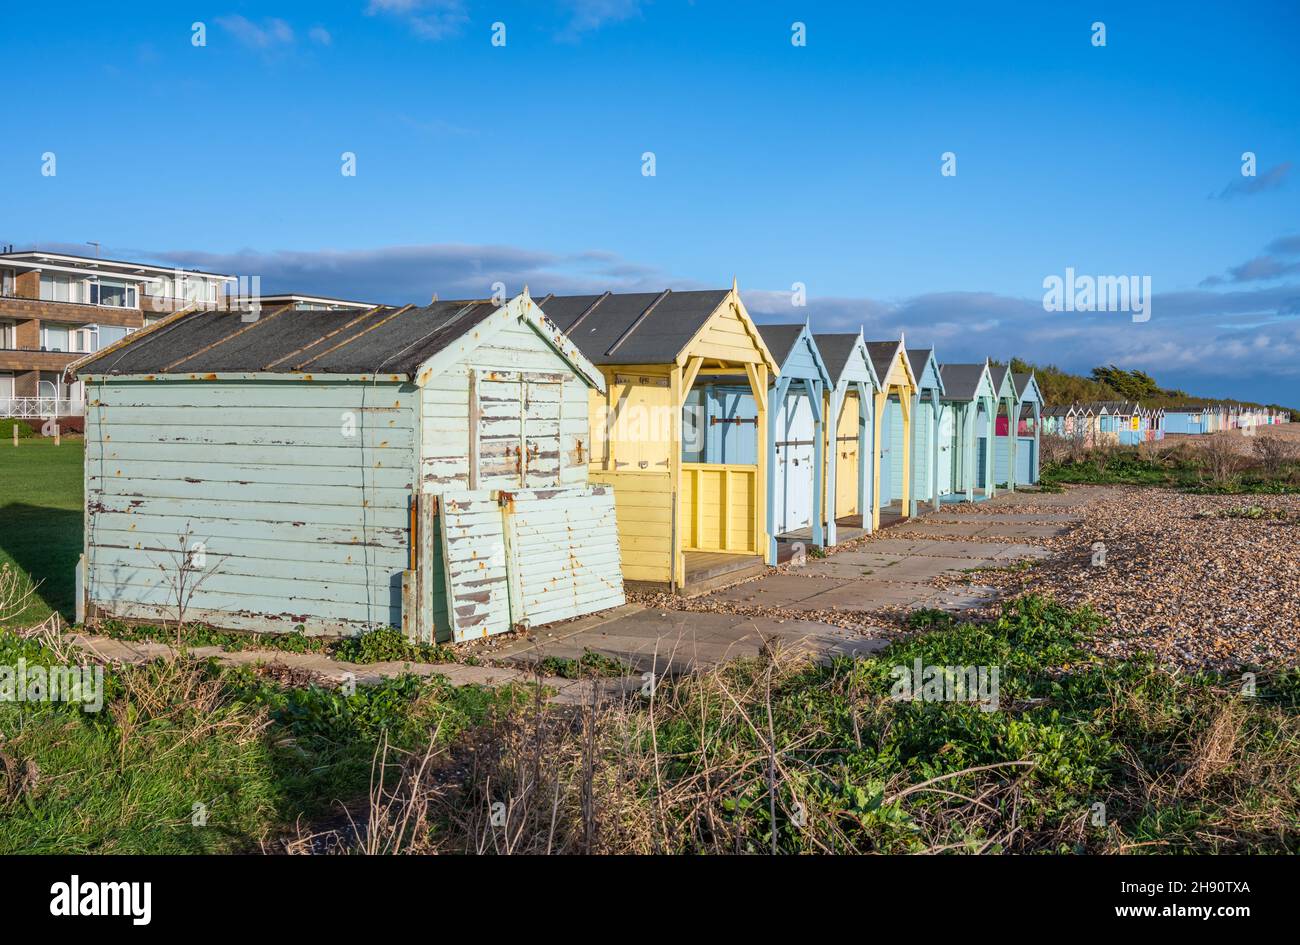 Colourful wooden beach huts on the seafront on the shingle beach along the South Coast coastline in Rustington, West Sussex, England, UK. Stock Photo